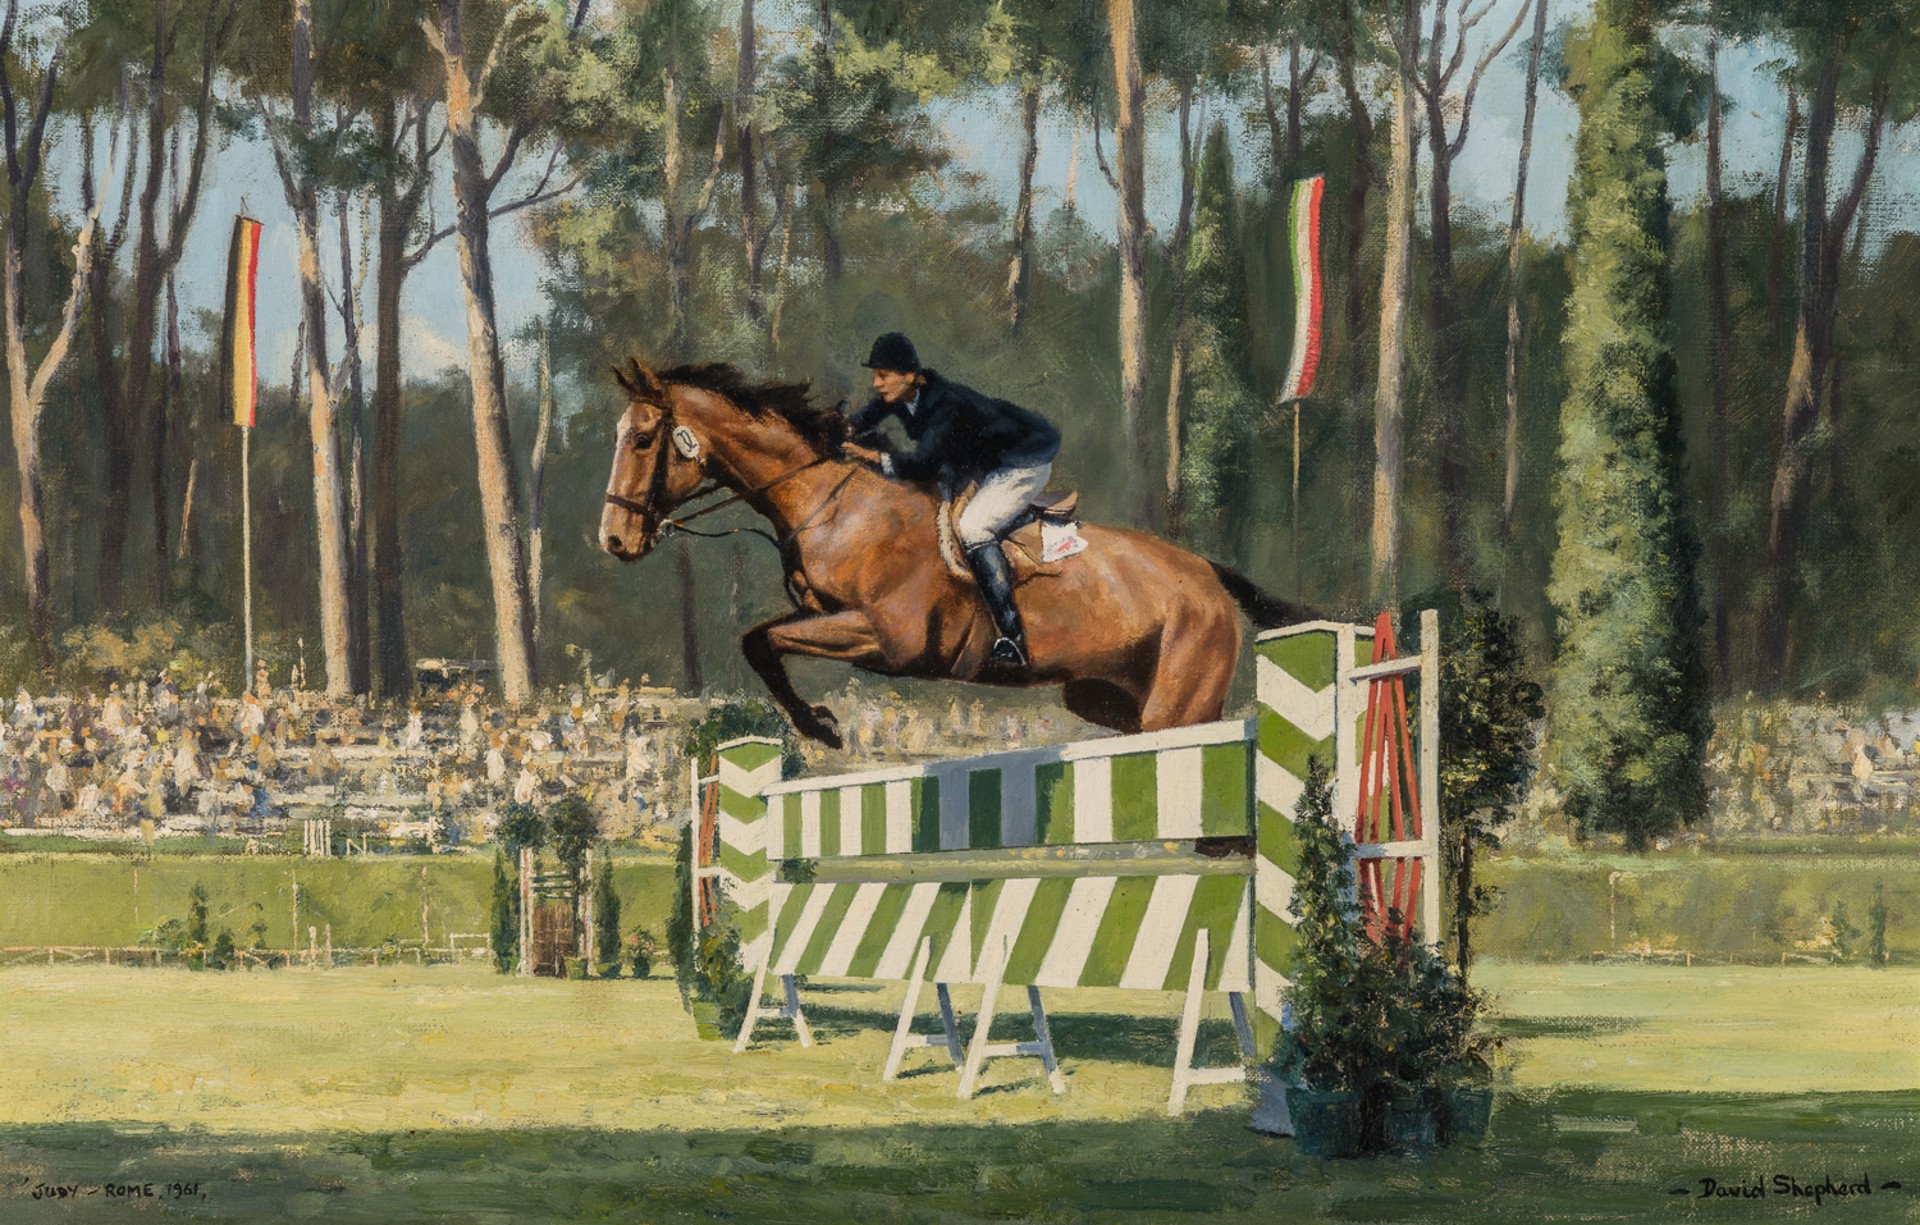 JUDY ON SPRING FEVER AT THE ROME OLYMPICS by David Shepherd